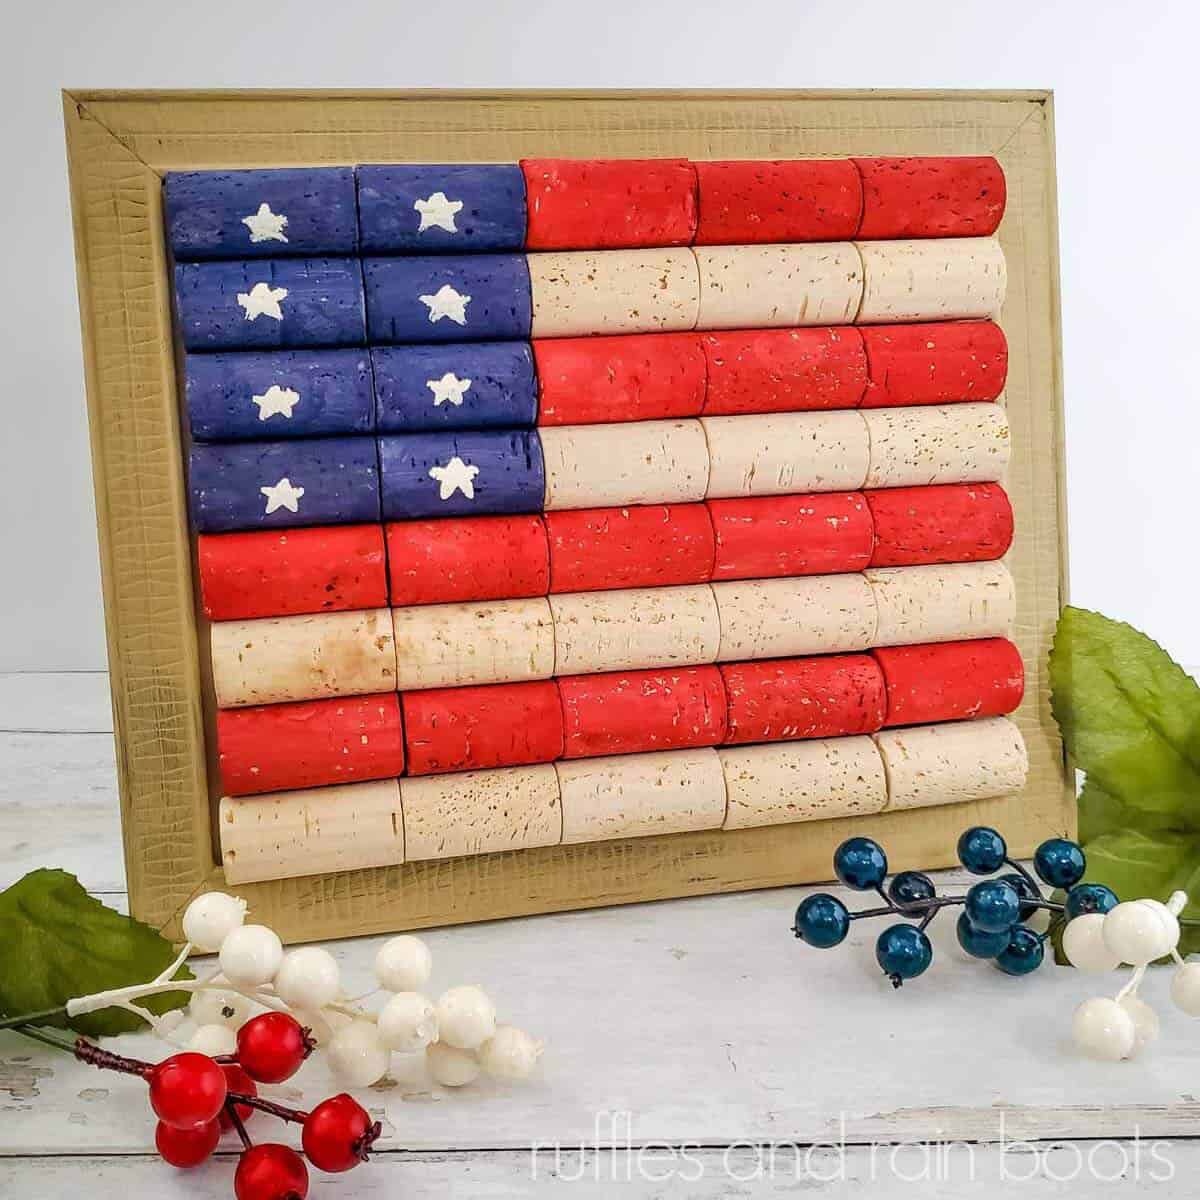 Square image close up of a wine cork flag painted in red and blue acrylic paint with small stars on a white wood background with red, white, and blue berries.